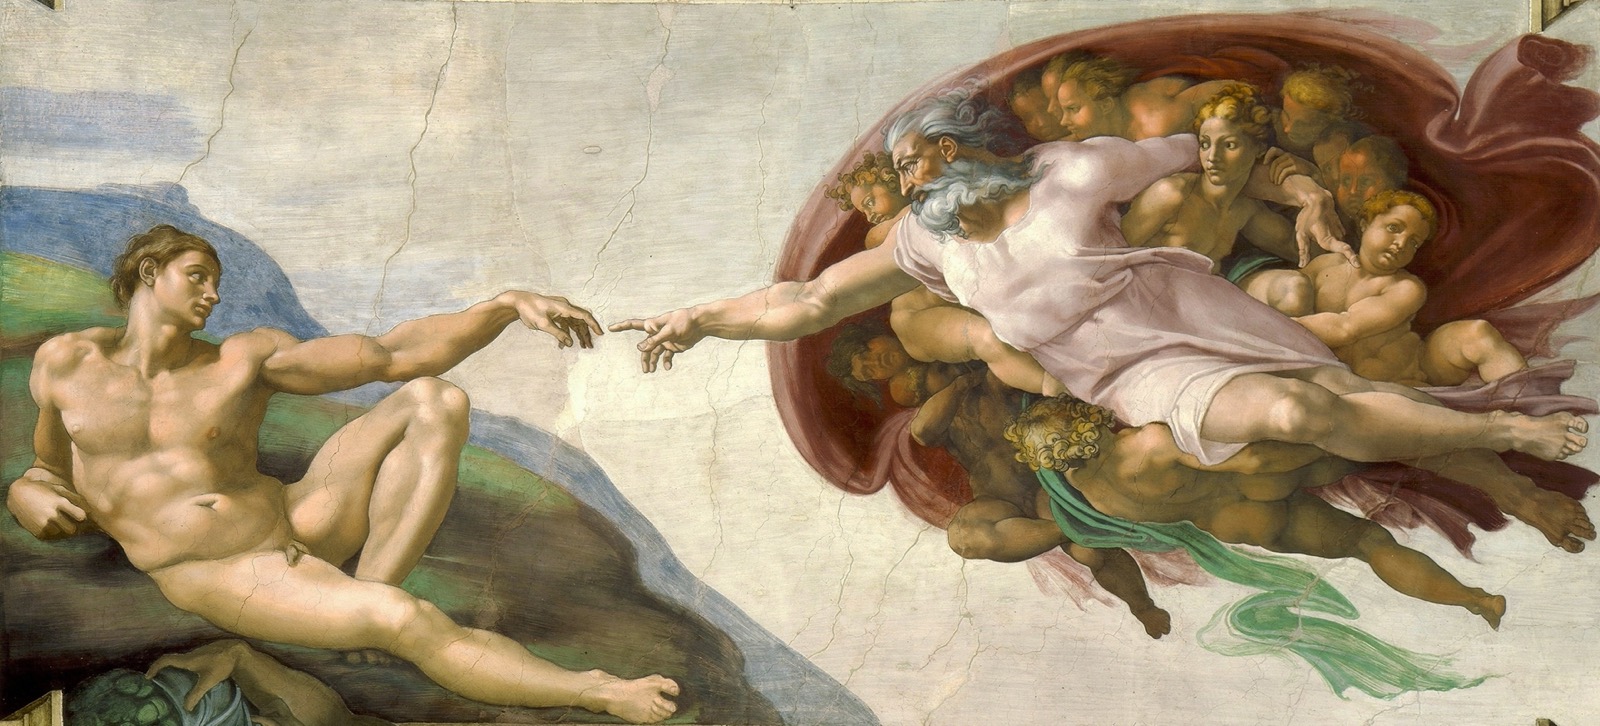 I'm Sure You Can't Match 14 of Paintings to the Artist Quiz The Creation Of Adam Painting By Michelangelo